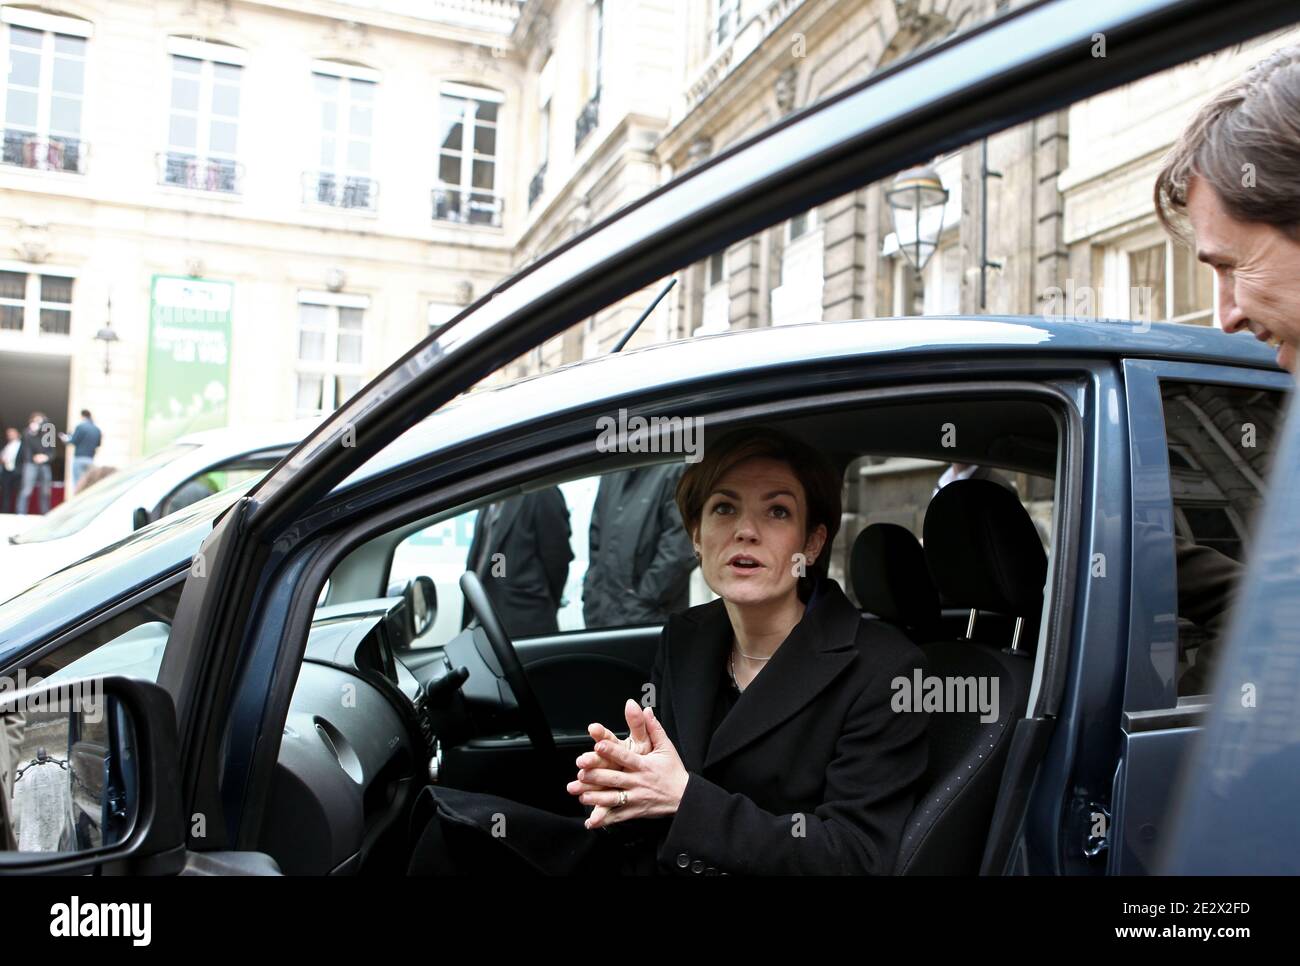 French Junior ecology minister Chantal Jouanno is pictured in the Peugeot iOn electric car in the courtyard of the Ecology ministry after a meeting focus on electric and hybrid cars development in Paris, France on April 13th, 2010. Photo by Stephane Lemouton/ABACAPRESS.COM Stock Photo